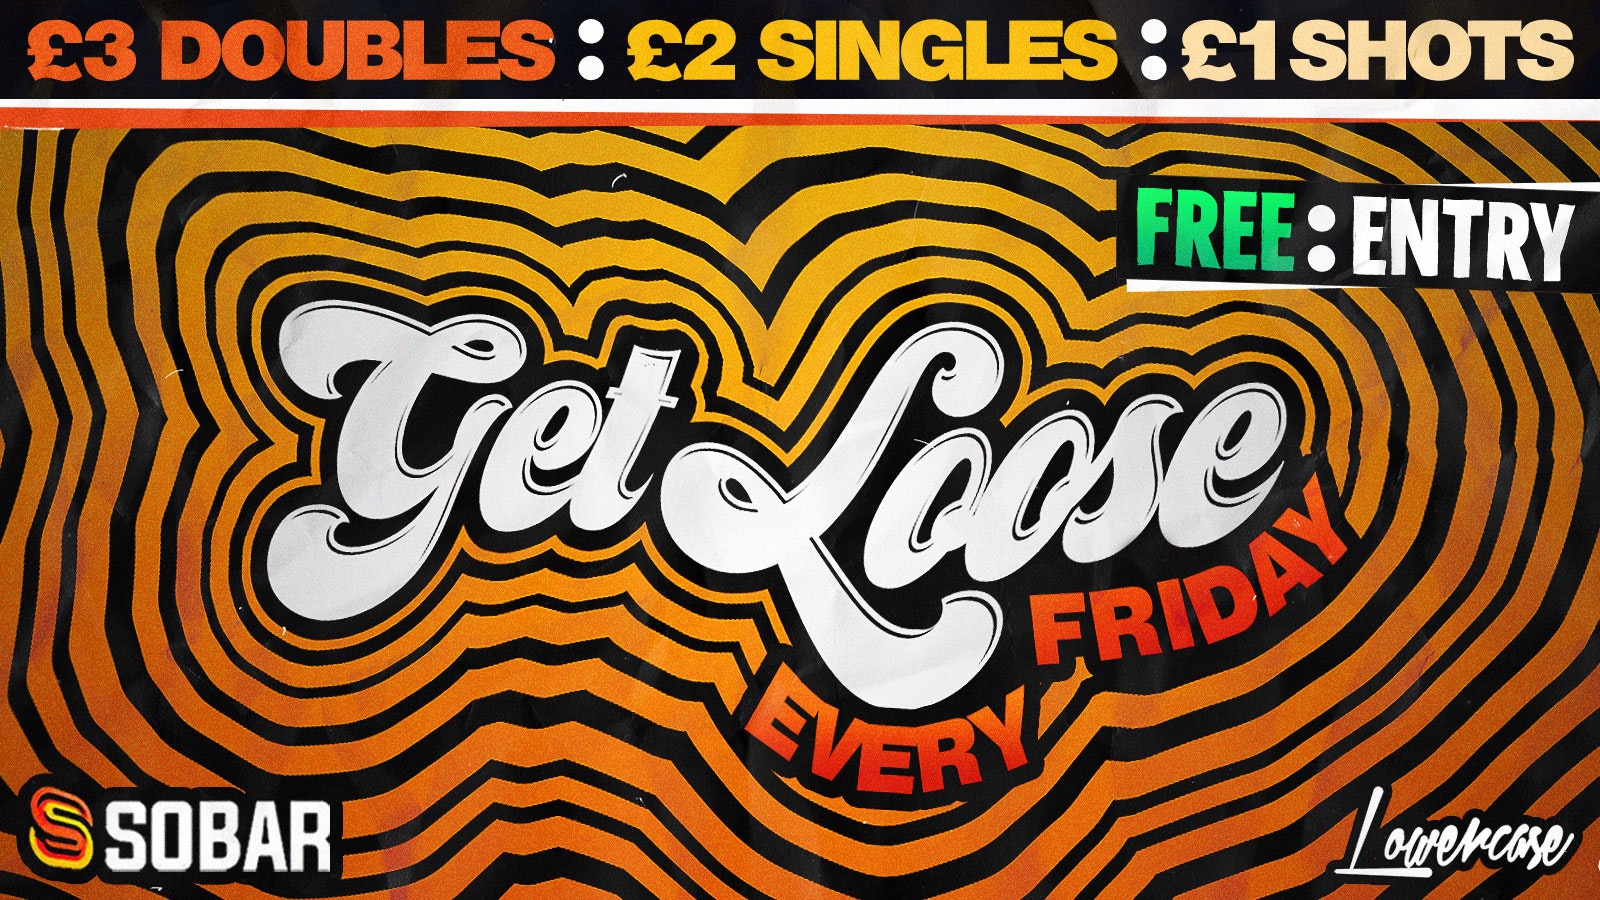 ⚠️TONIGHT!⚠️- Get Loose Every Friday @ Sobar – Southampton’s Newest Weekly Friday!